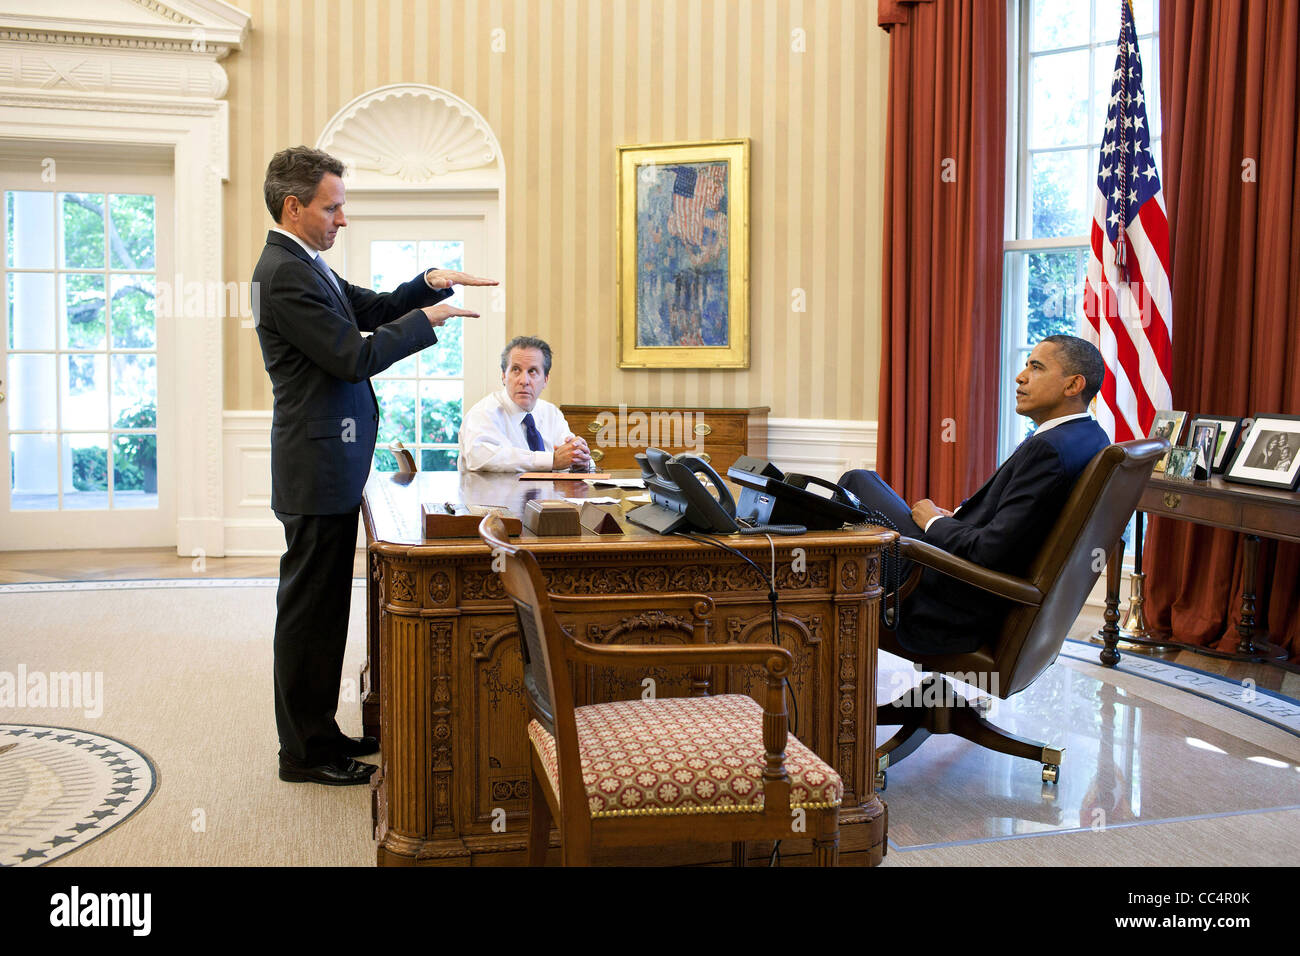 President  Obama meets with Treasury Secretary Geithner and National Economic Council Director  Sperling in the Oval Office Stock Photo